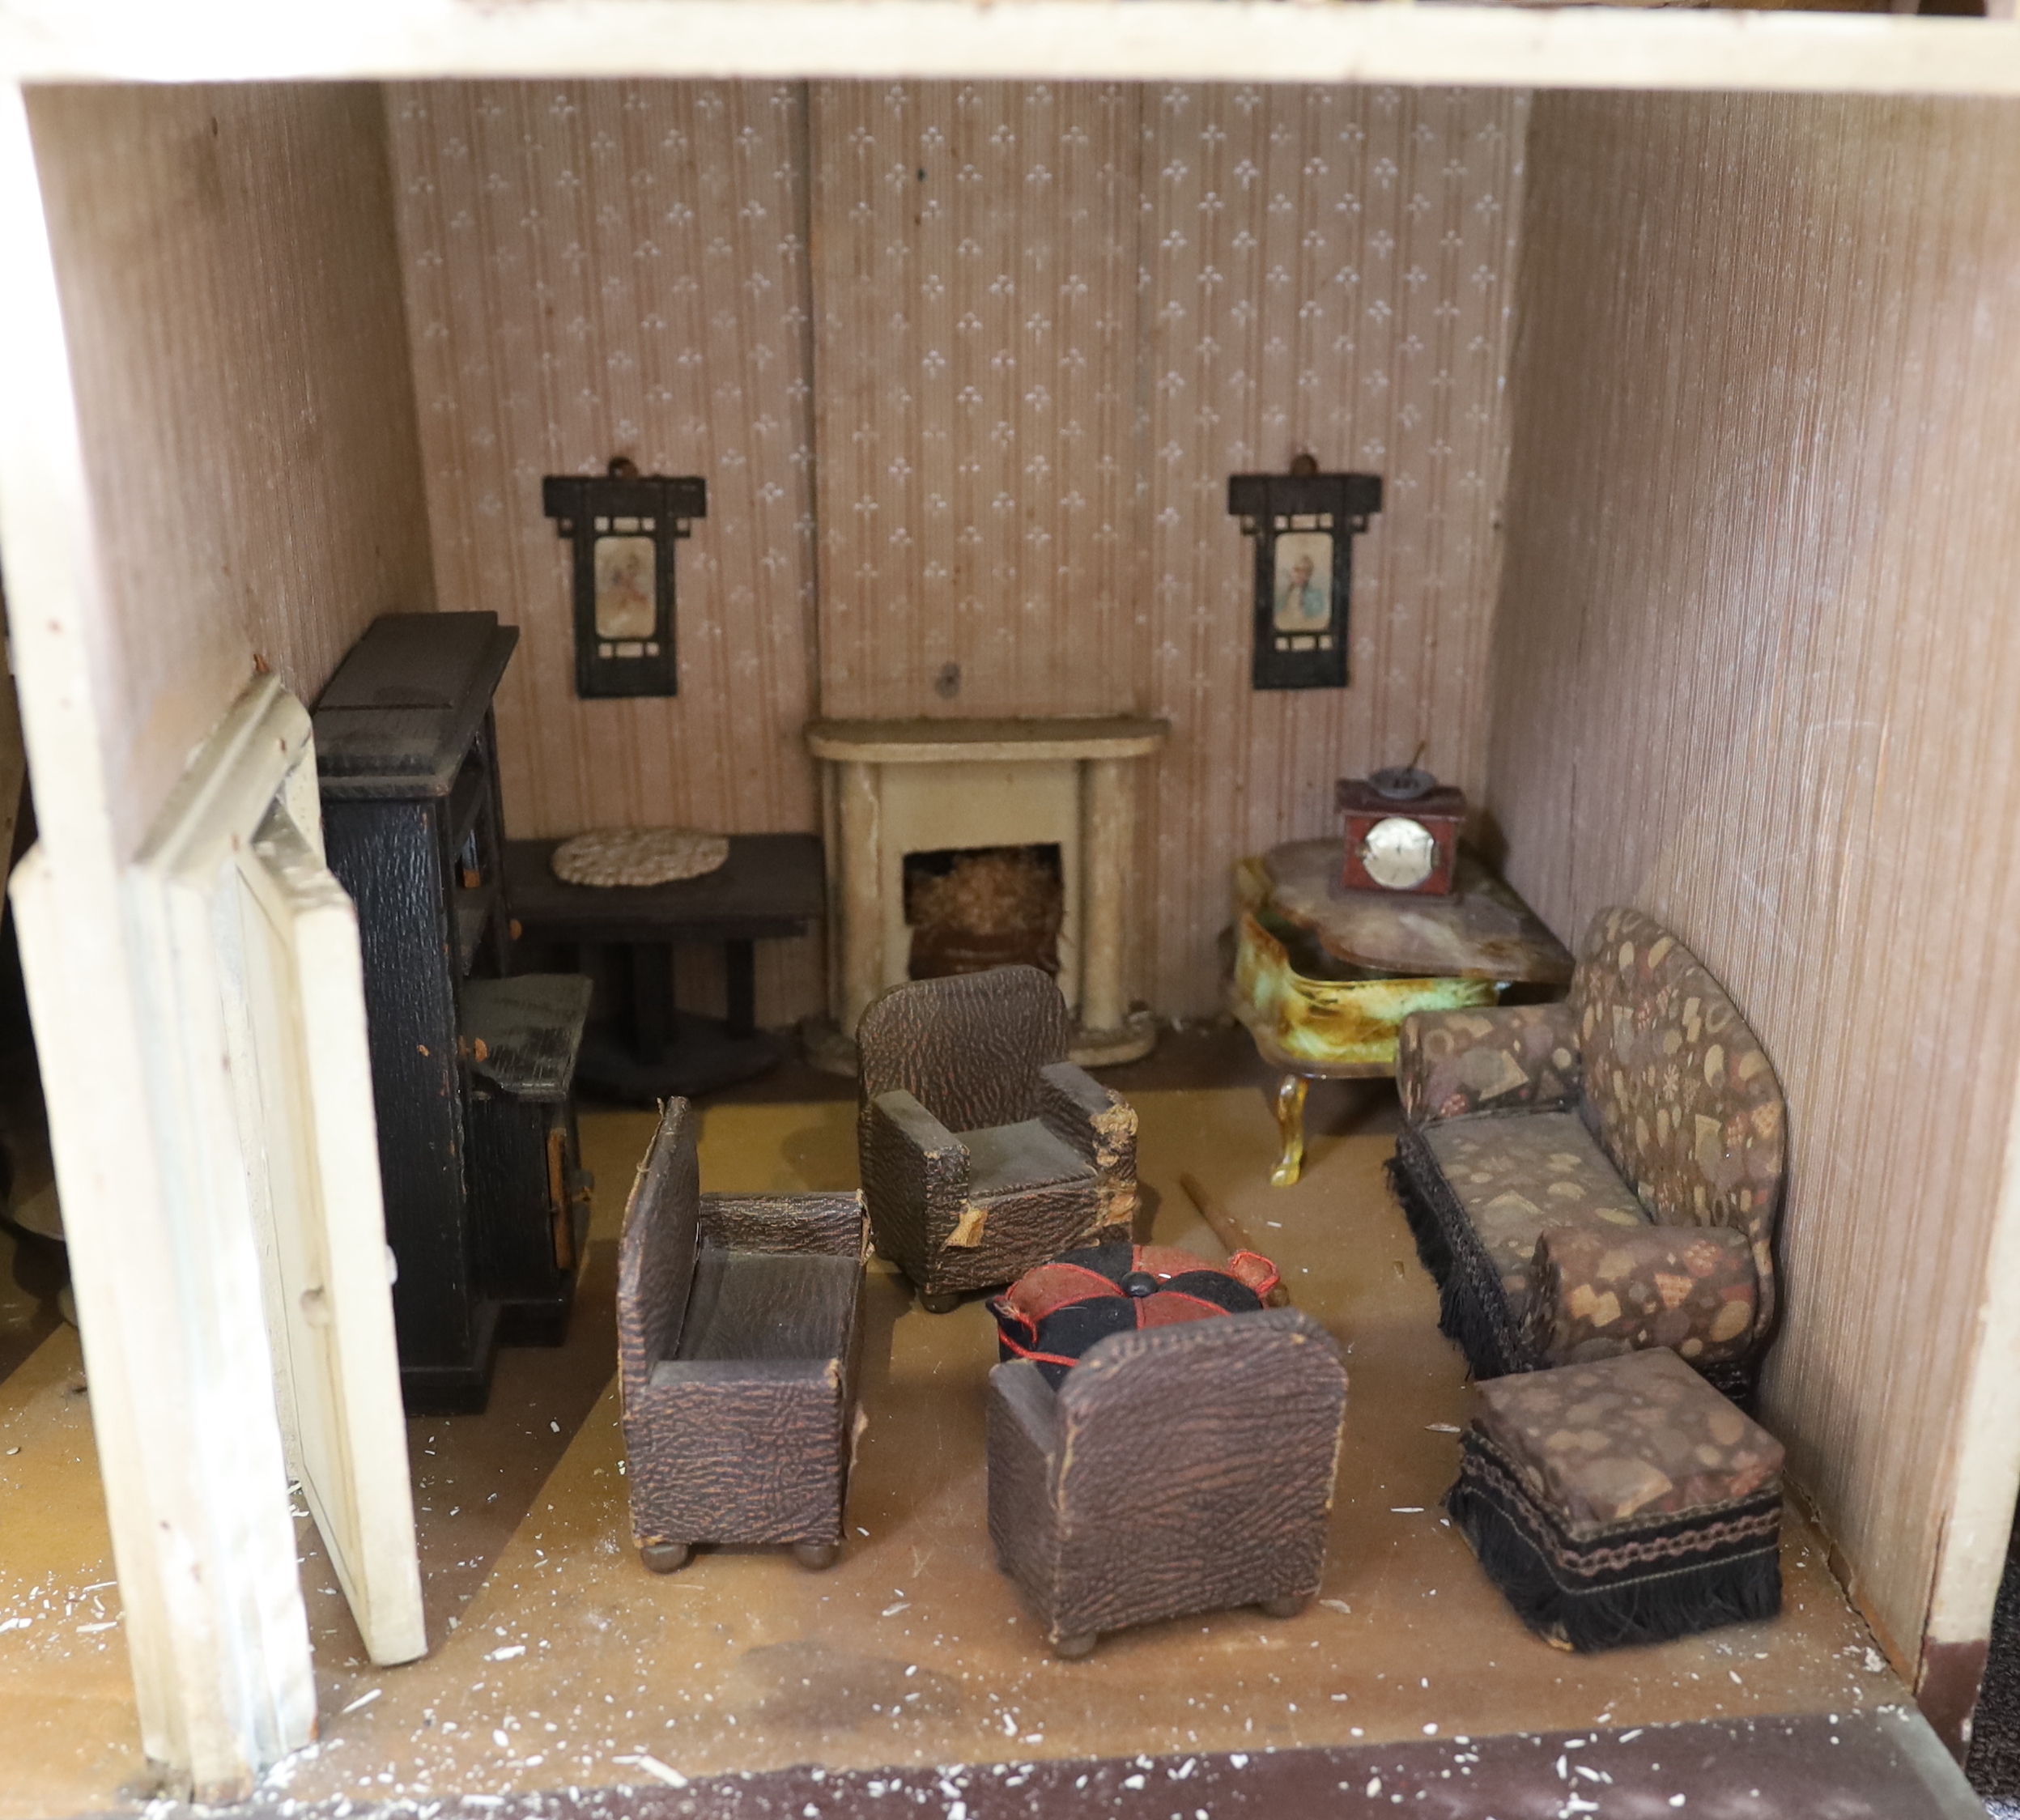 ‘Kits Coty House': An important G. & J. Lines furnished dolls’ house, dated 1912, modelled as - Image 5 of 7